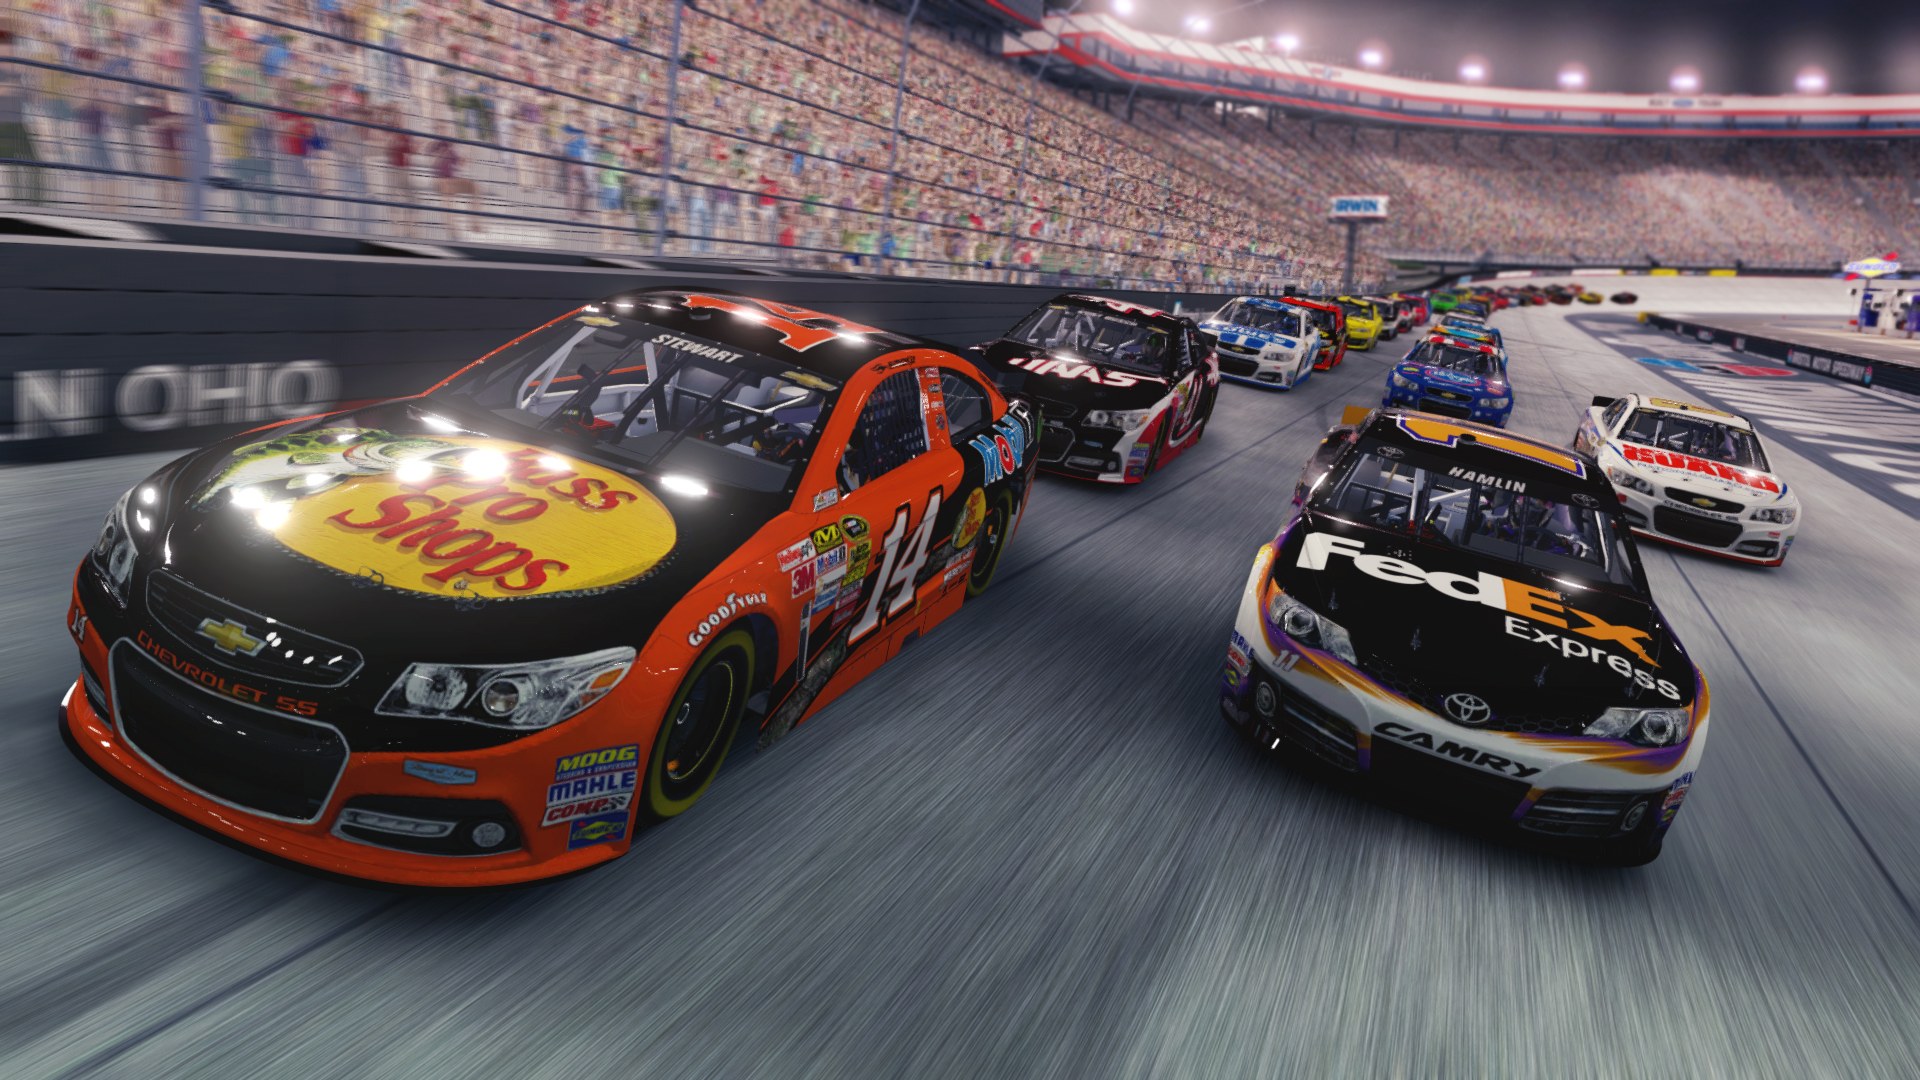 Free download Nascar 2014 Exclusive HD Wallpapers 6562 [1920x1080] for